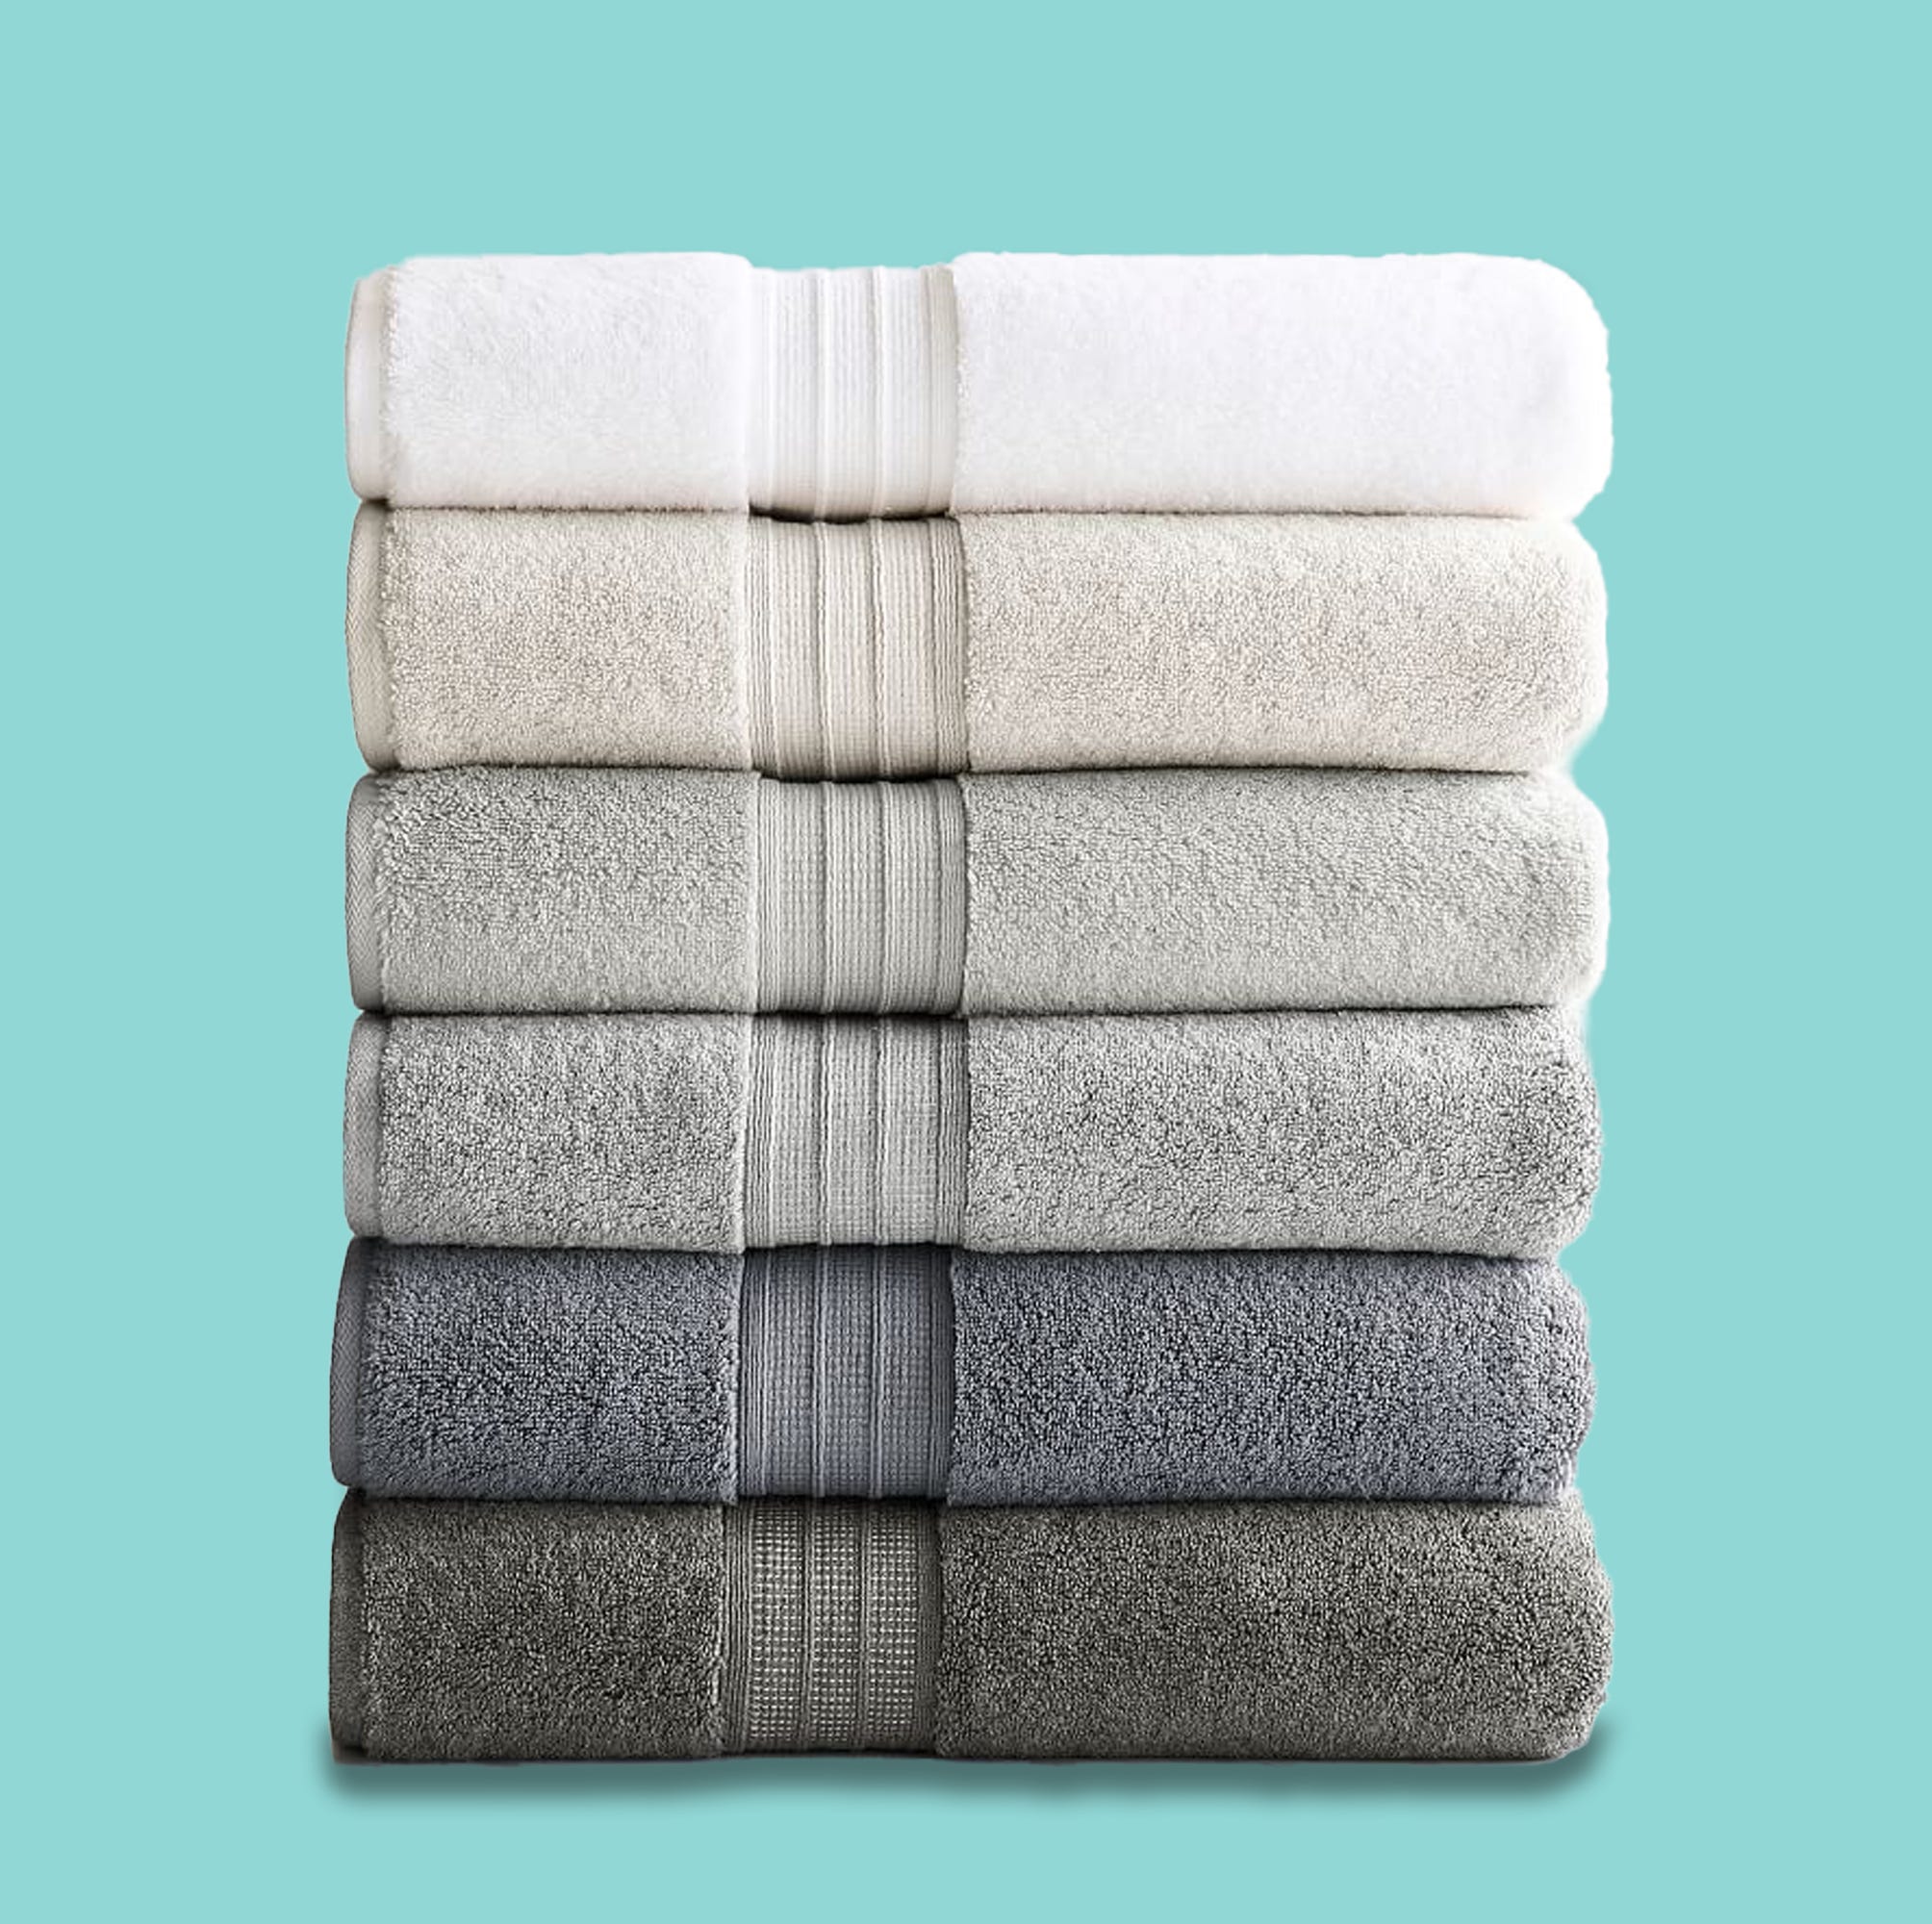 The Best Bath Towels for a Spa-Like Experience